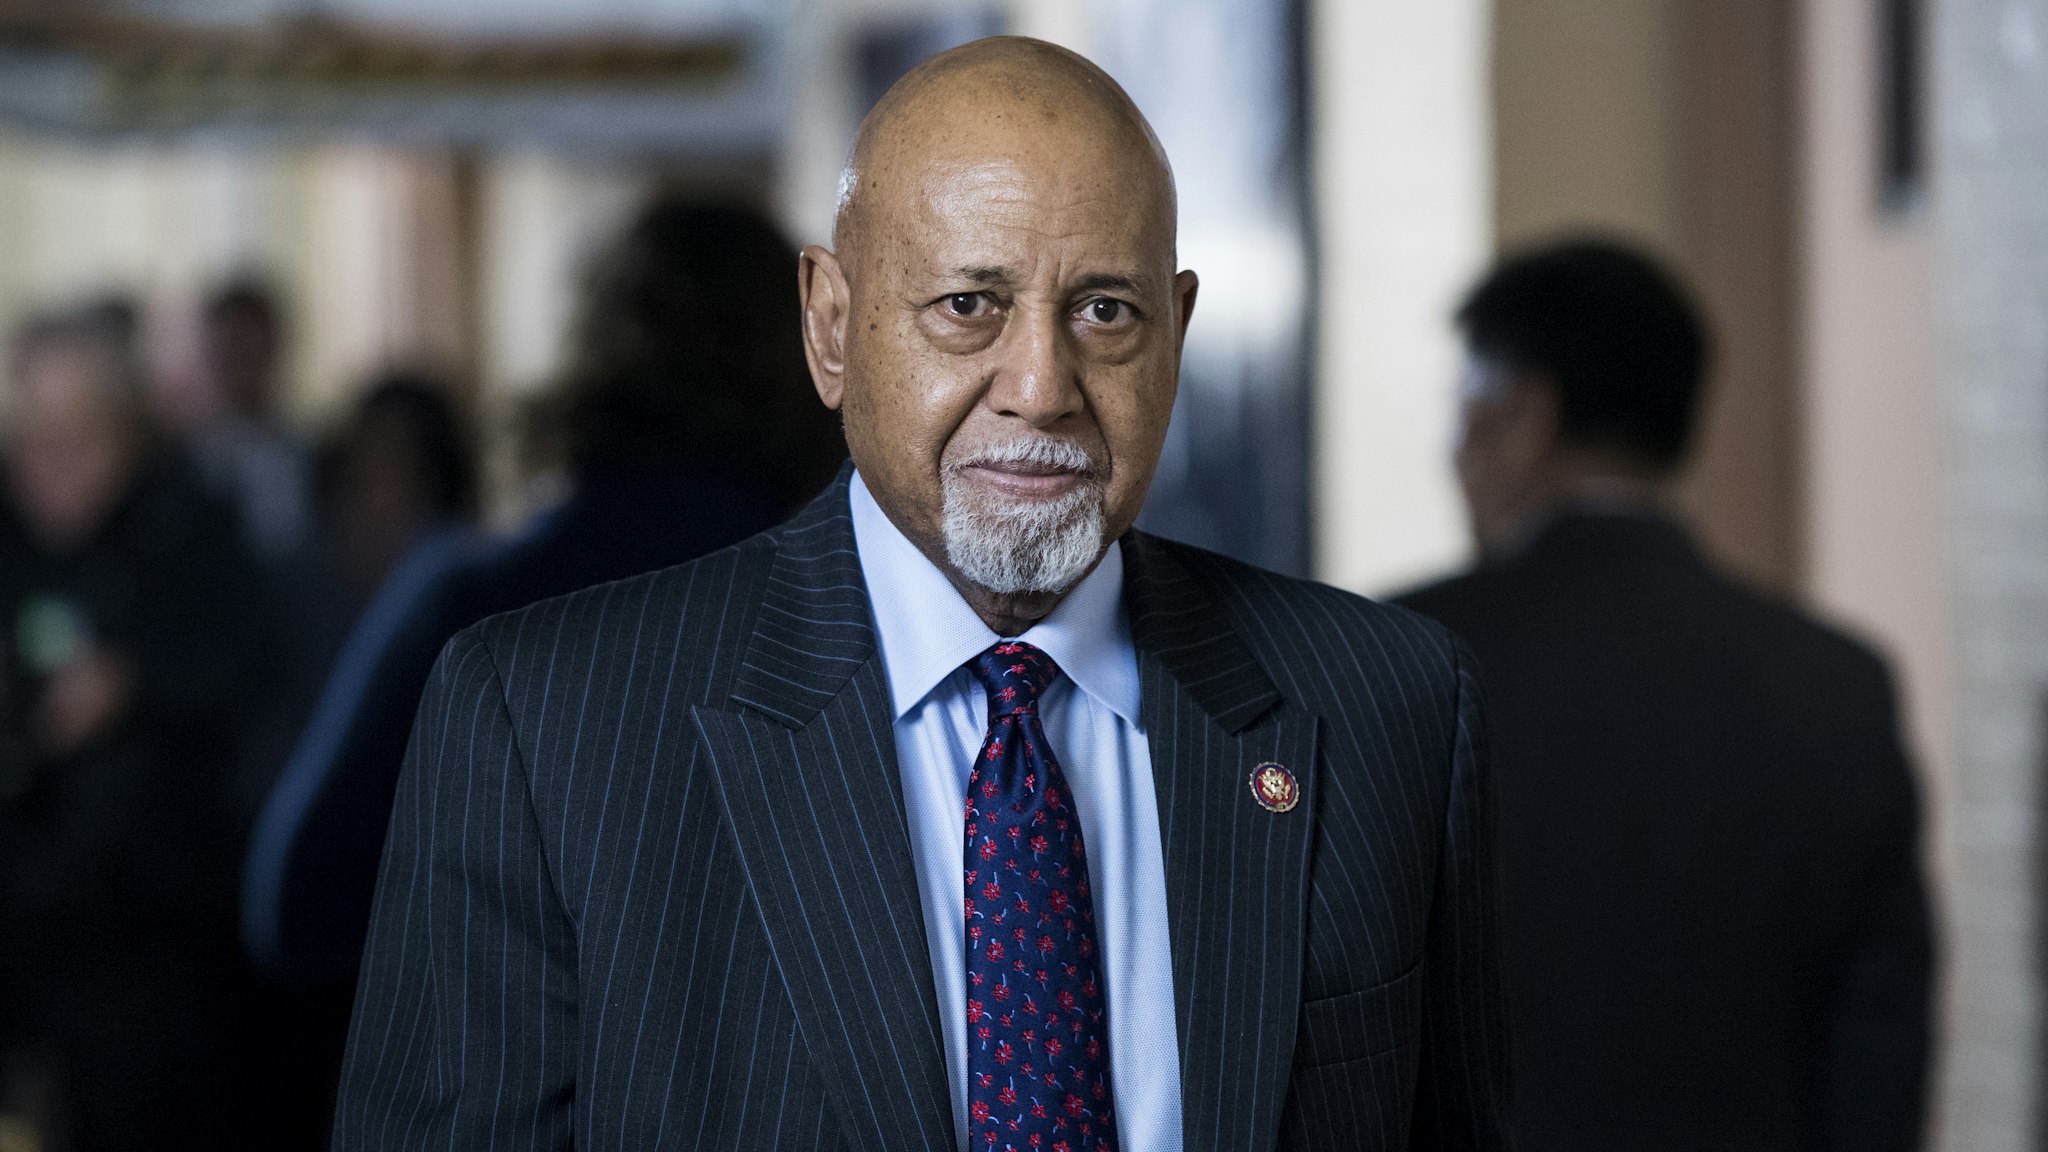 UNITED STATES - JANUARY 4: Rep. Alcee Hastings, D-Fla., leaves the House Democrats' caucus meeting in the Capitol on Friday, Jan. 4, 2019.